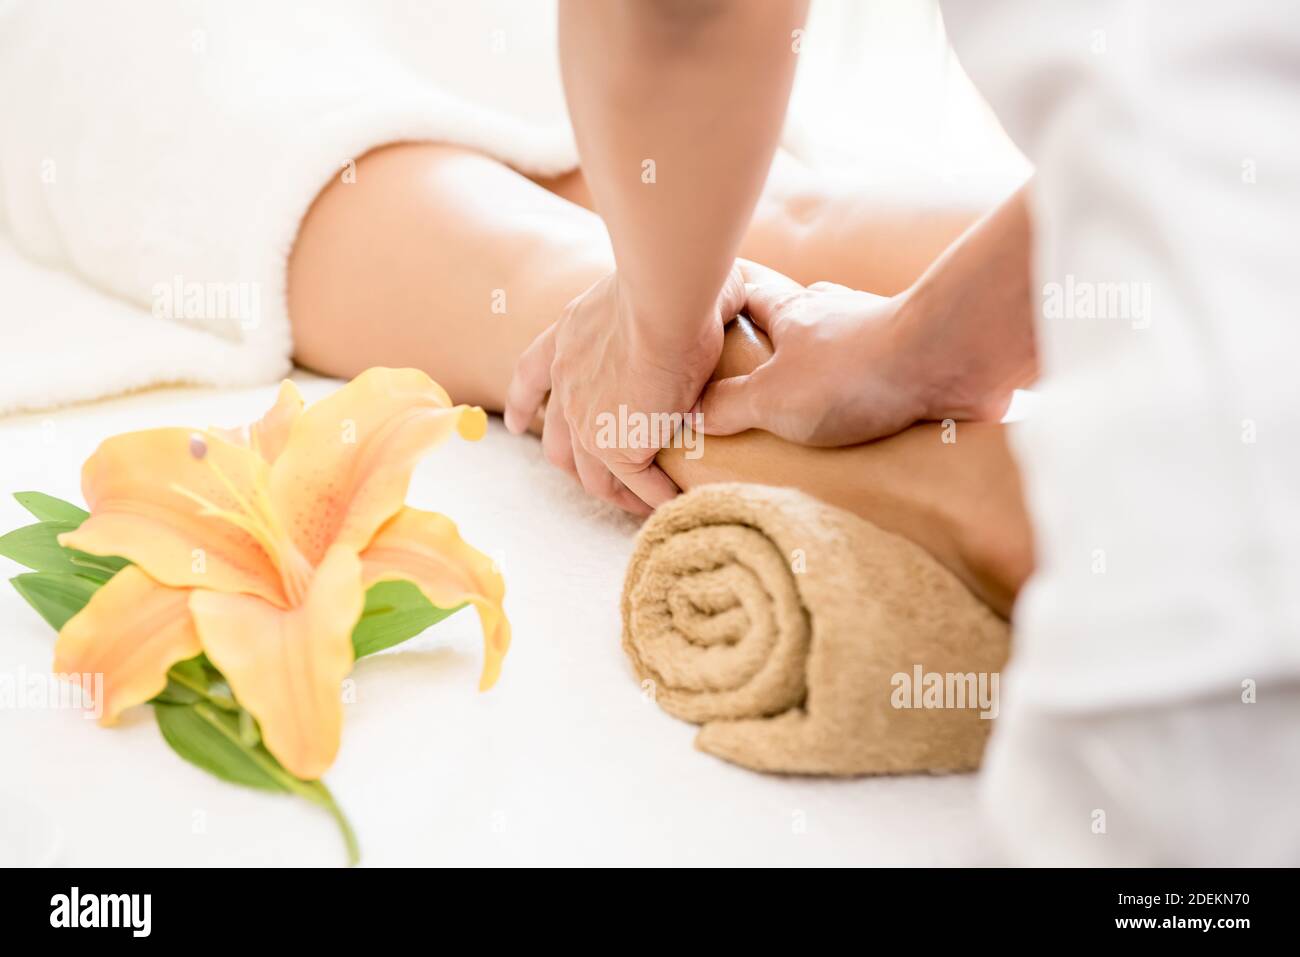 Professional therapist giving reflexology relaxing Thai leg massage treatment to a woman in spa Stock Photo